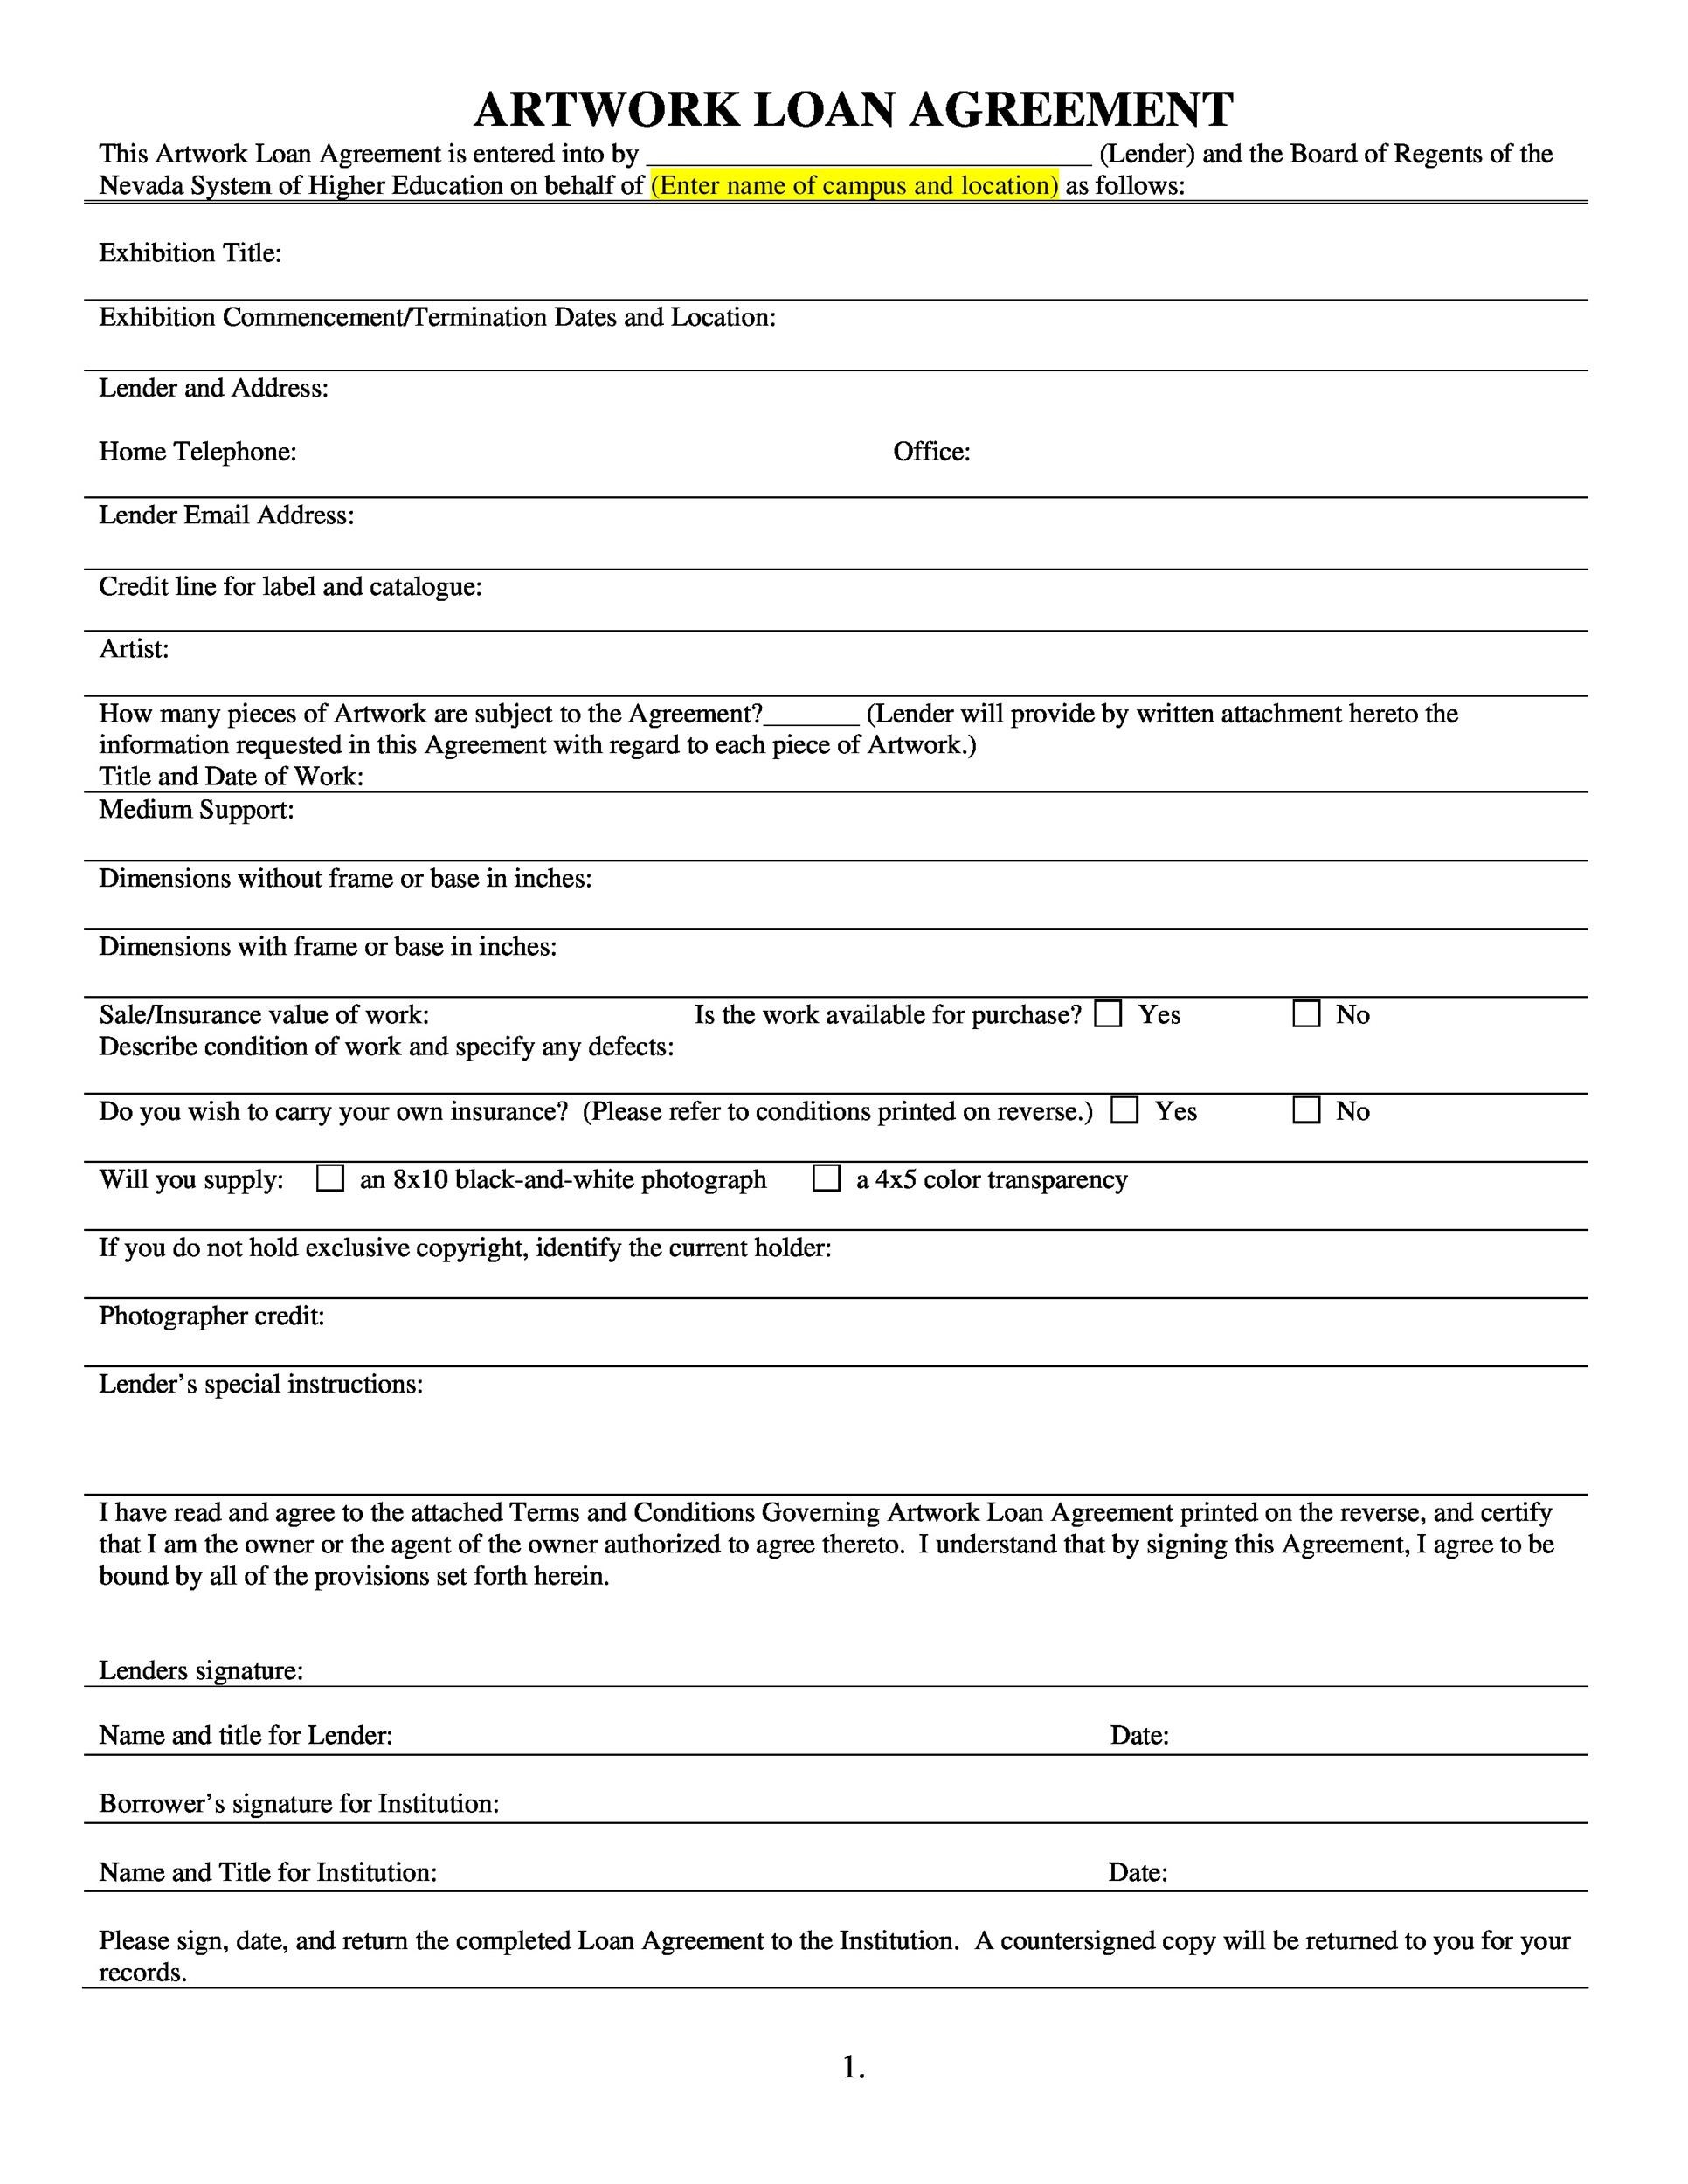 40+ Free Loan Agreement Templates [Word &amp; Pdf] ᐅ Templatelab with regard to Personal Loan Repayment Contract Template